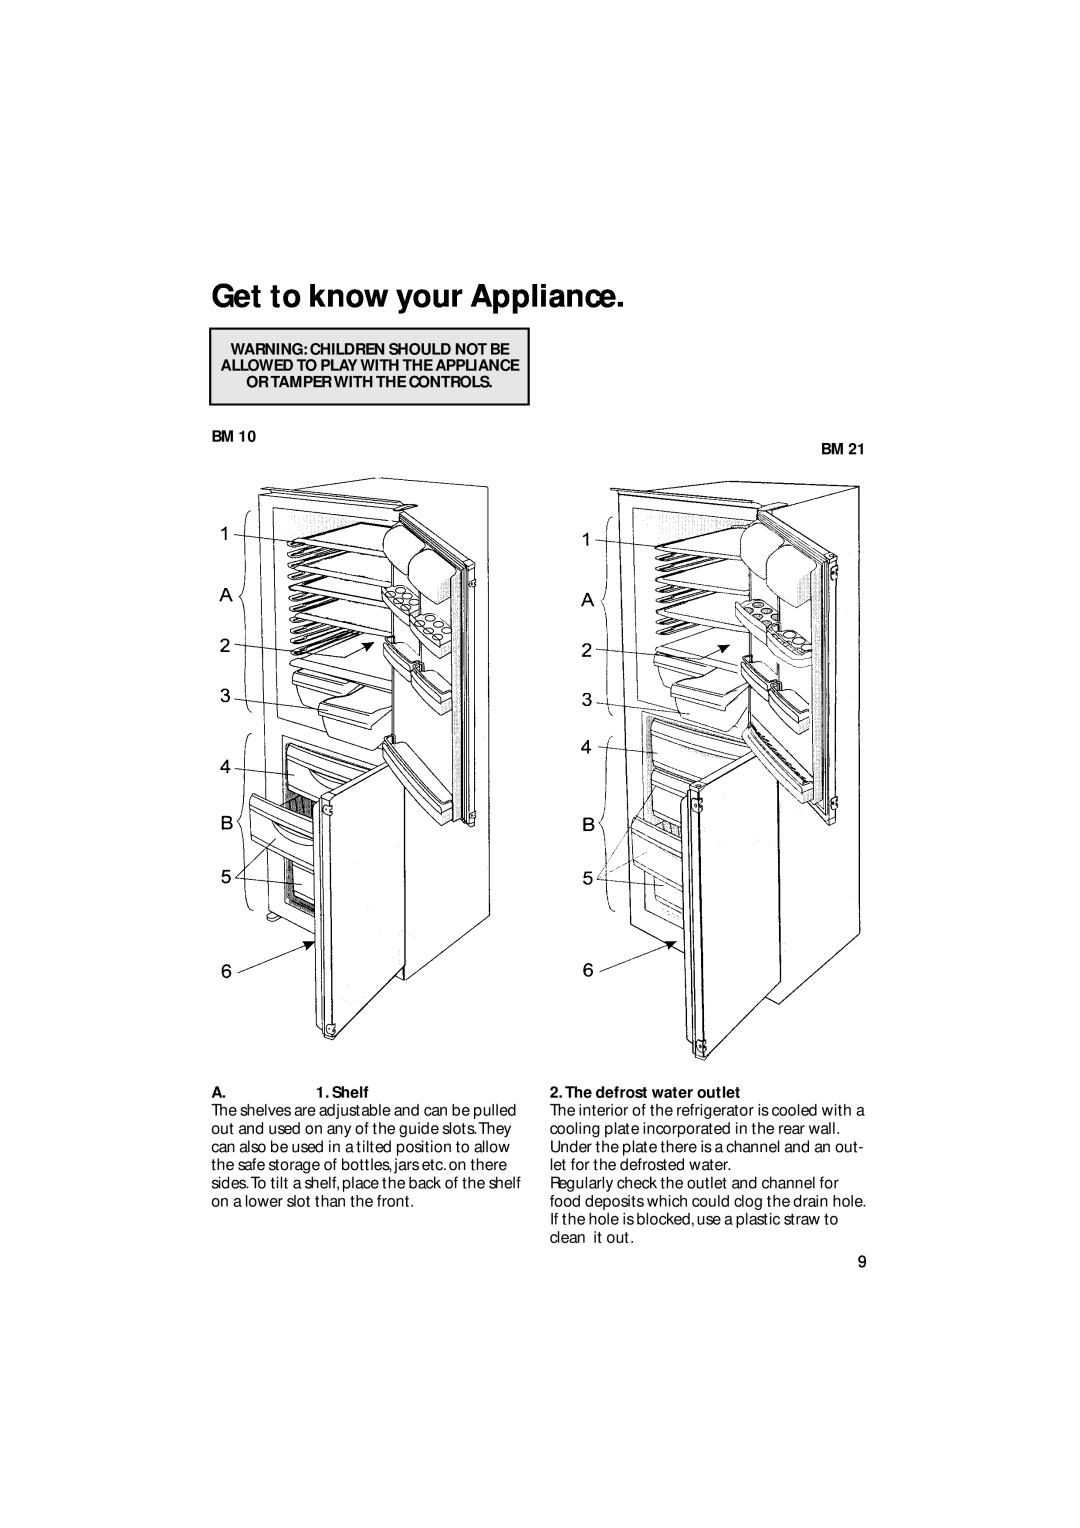 Hotpoint BM10 Get to know your Appliance, Warning Children Should Not Be Allowed To Play With The Appliance, A. 1. Shelf 